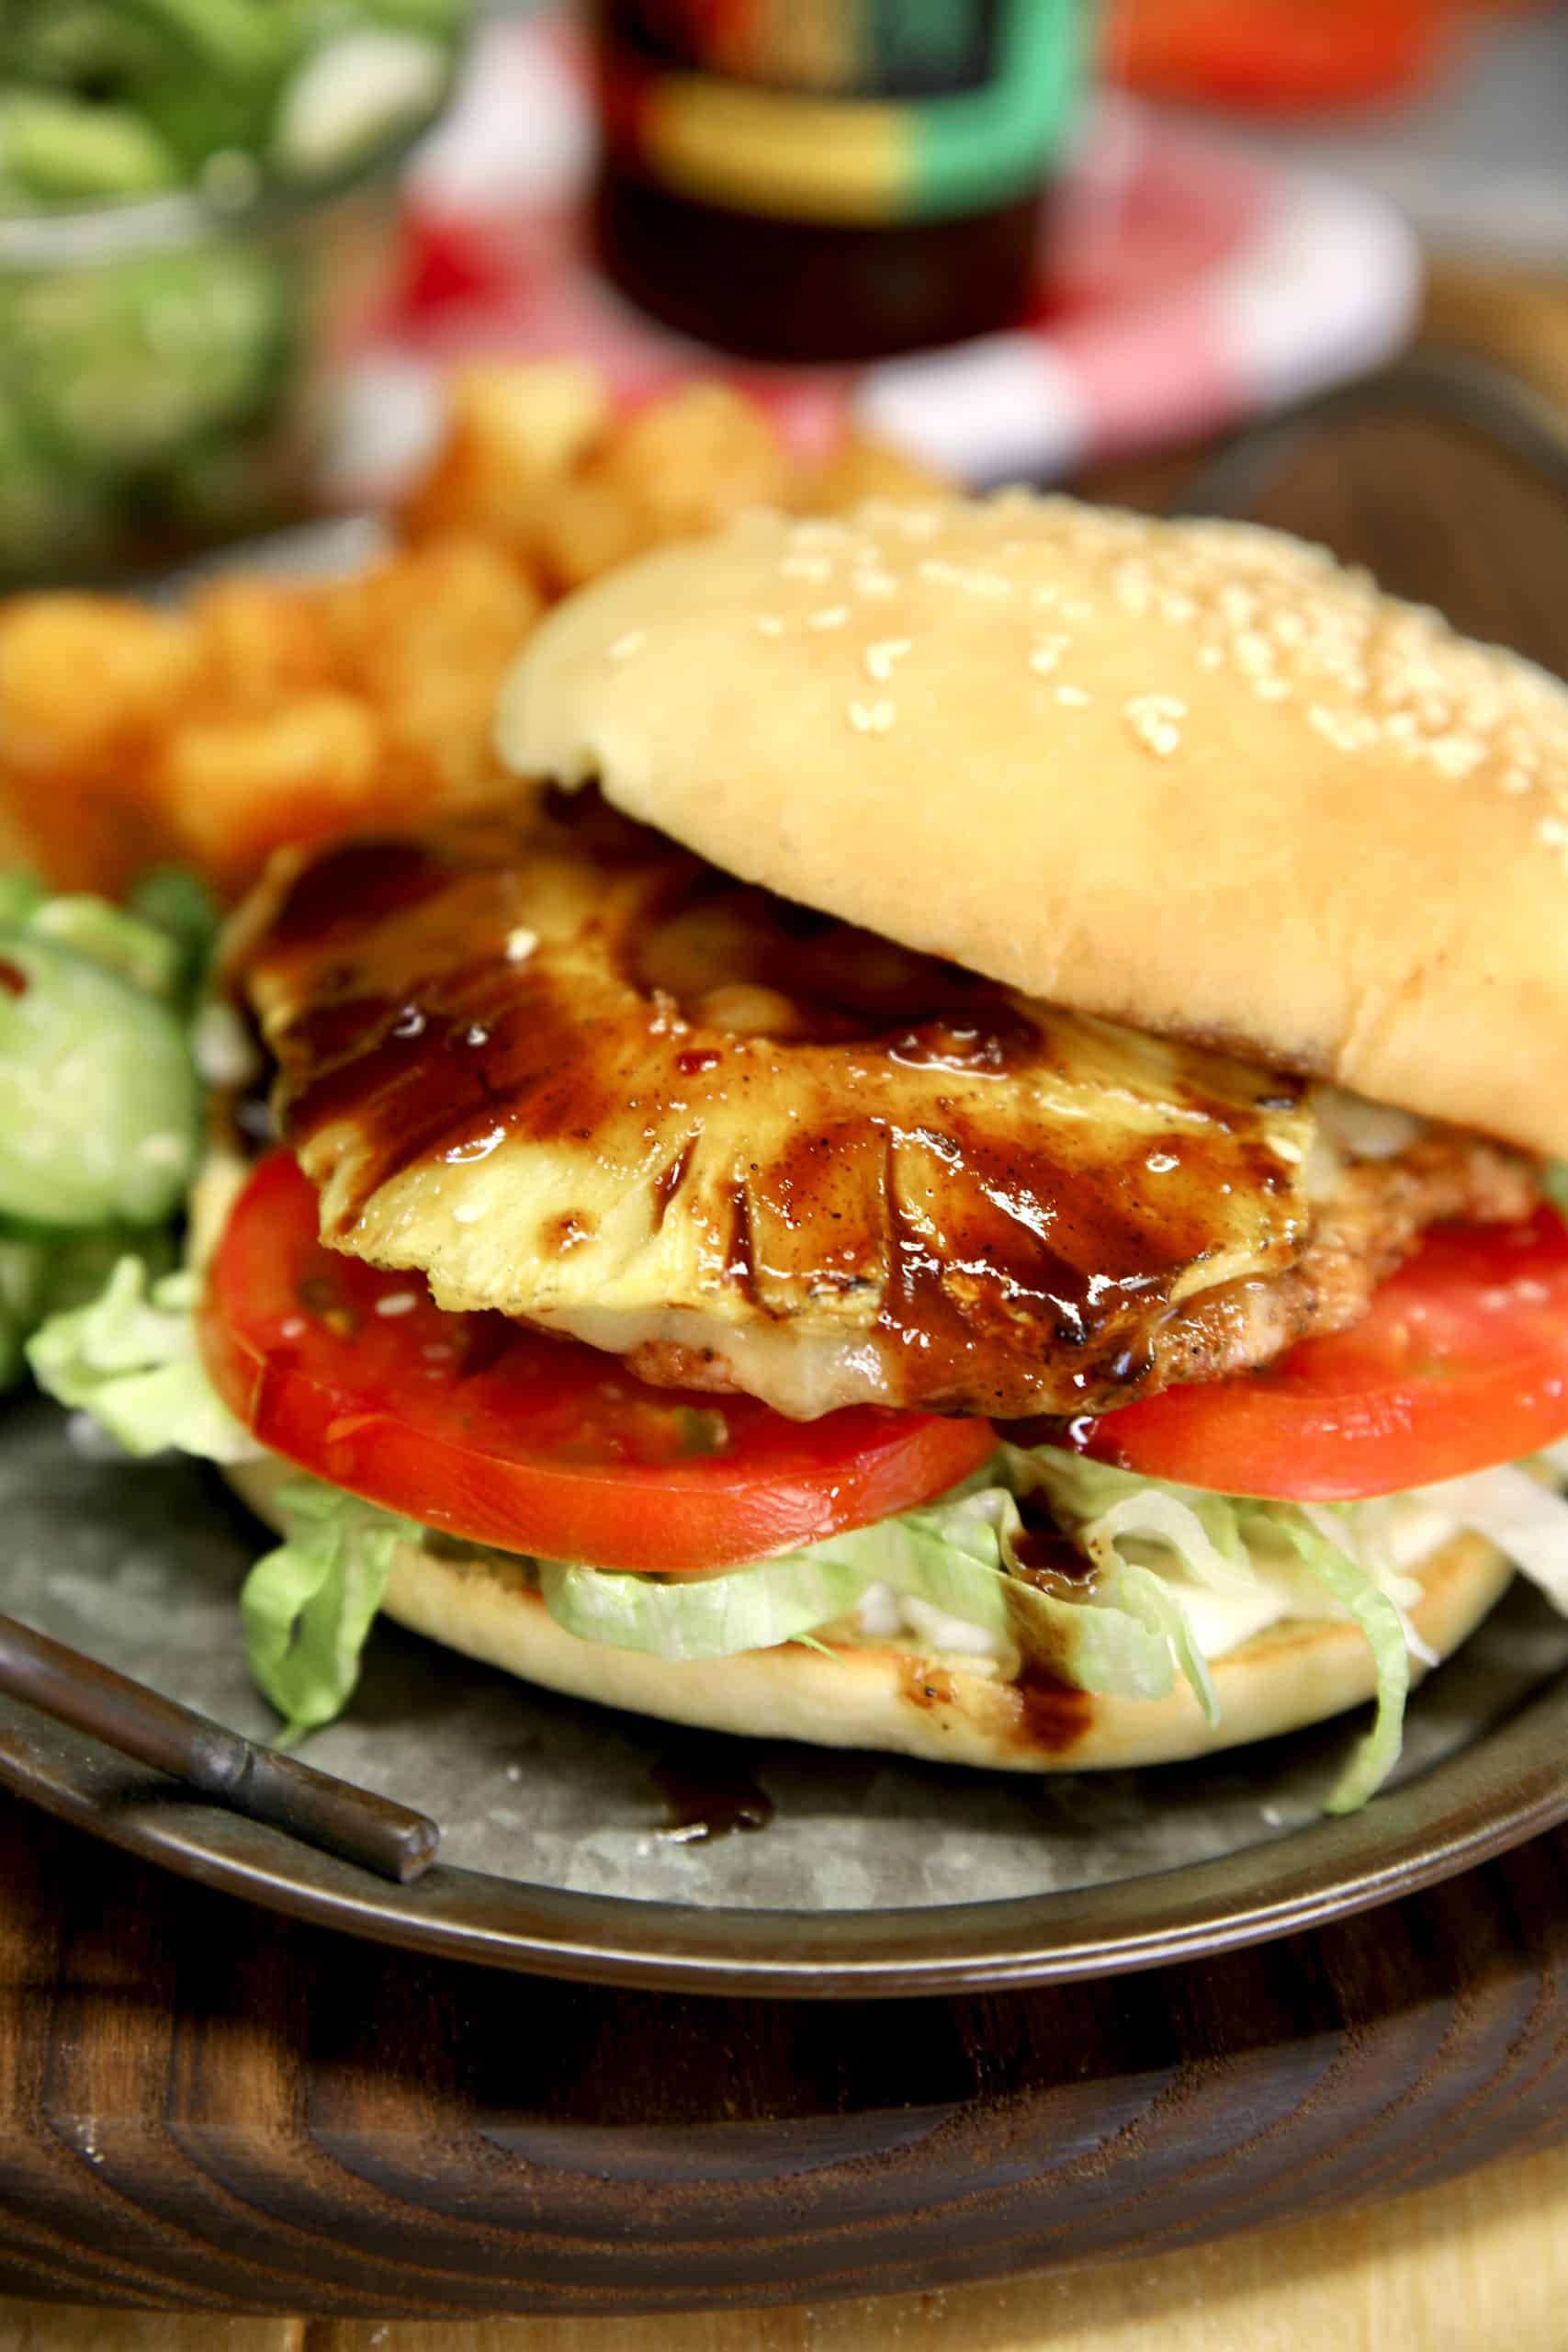 Closeup of jerk pork burger with jerk sauce, tomato, lettuce and grilled pineapple.